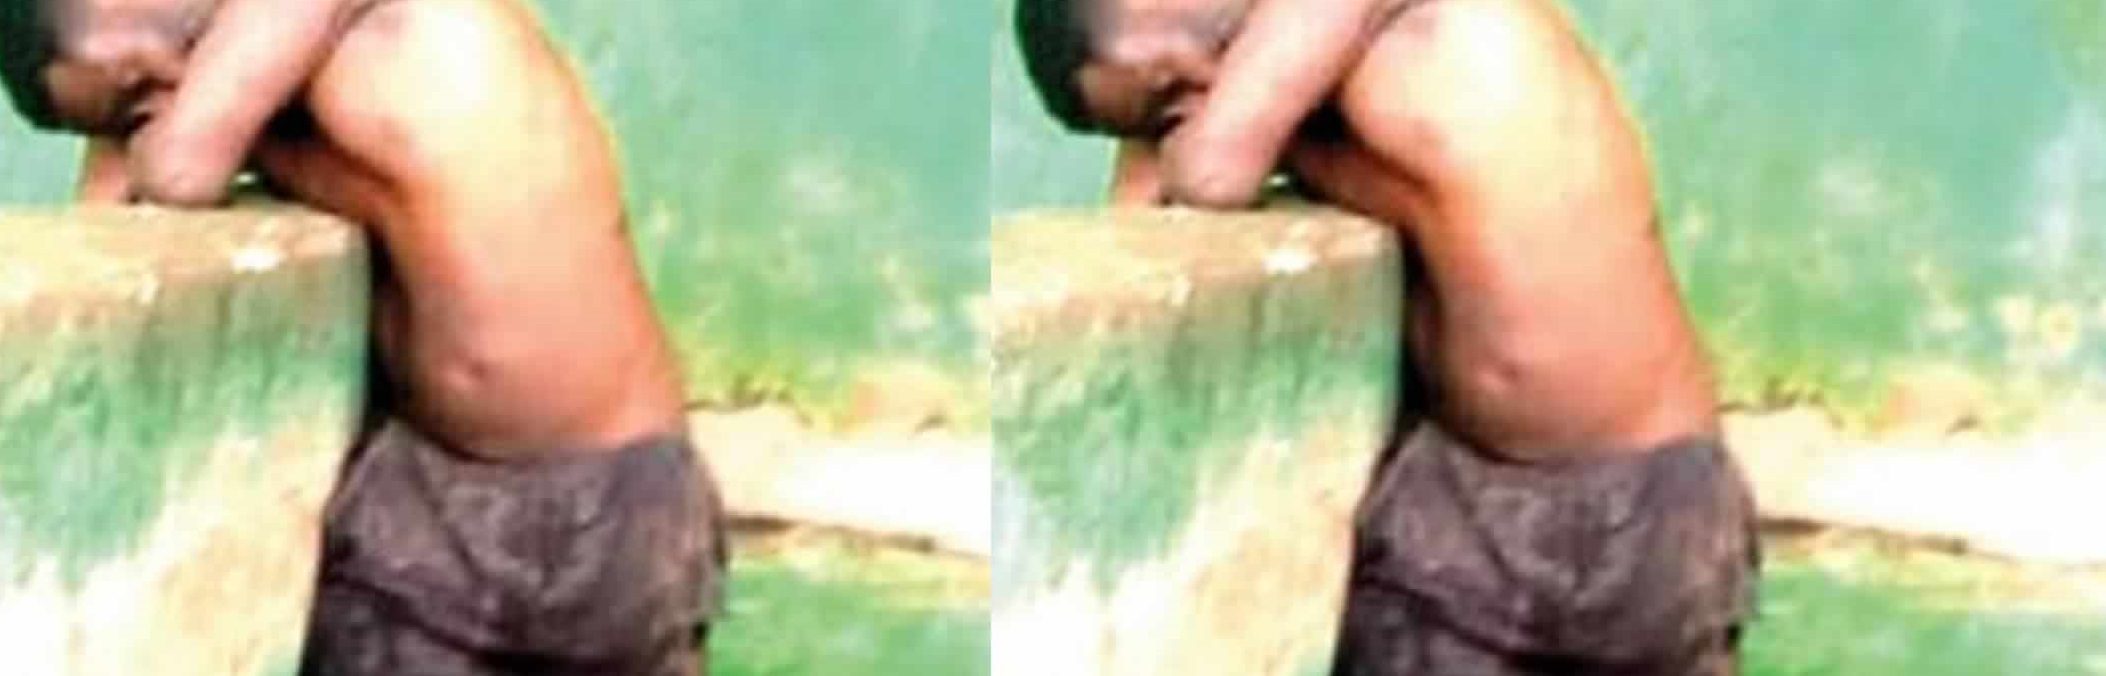 Lagos Residents Panic After a Man Was Found Dead While Standing in Park